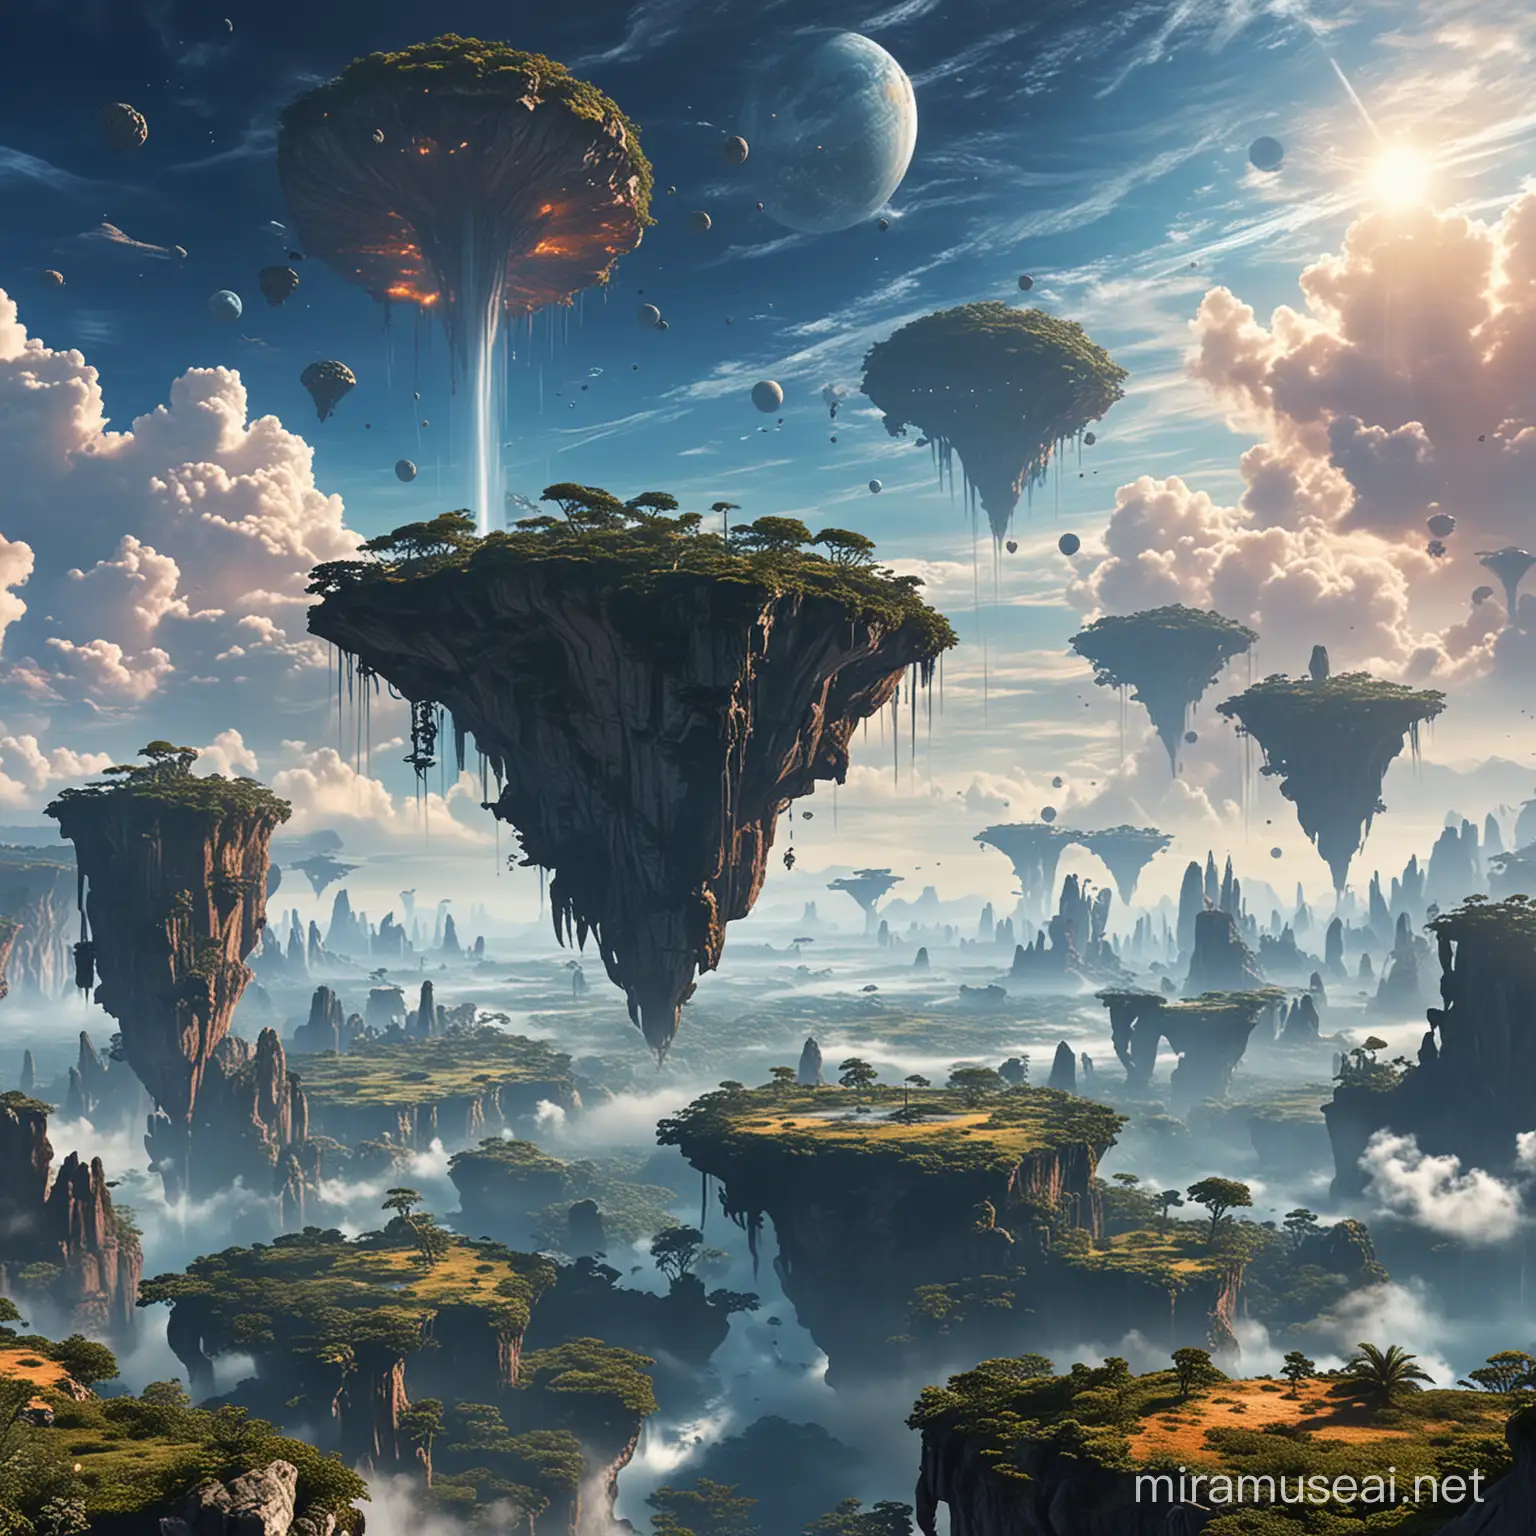 flying islands in the sky of the Pandora planet